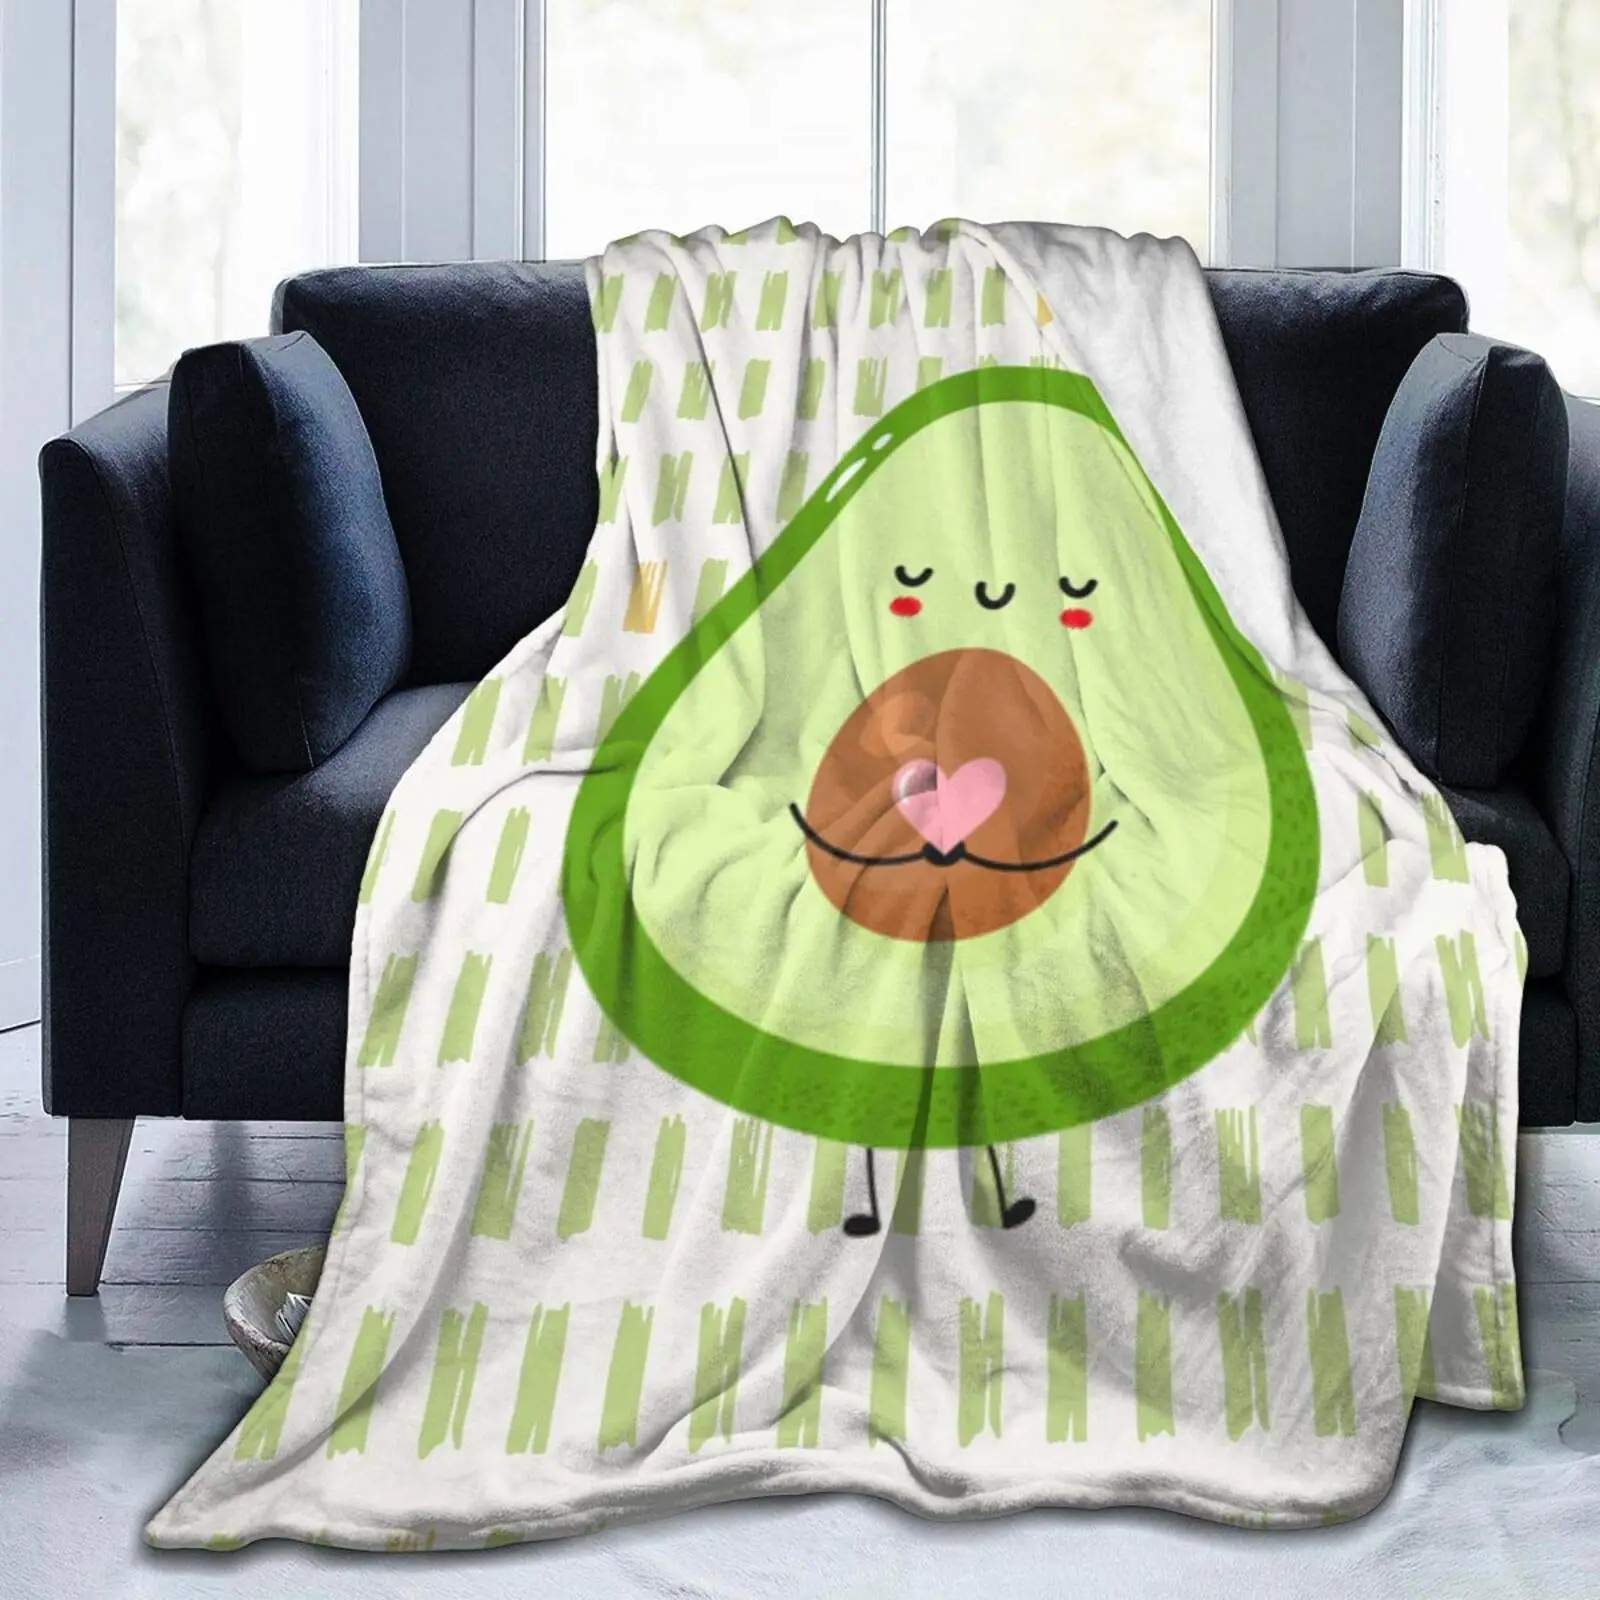 

Jumping Cute Funny Avocado Blanket Flannel Throw Lightweight Cozy Couch Bed Soft and Warm Plush Quilt 120x150cm for Teens